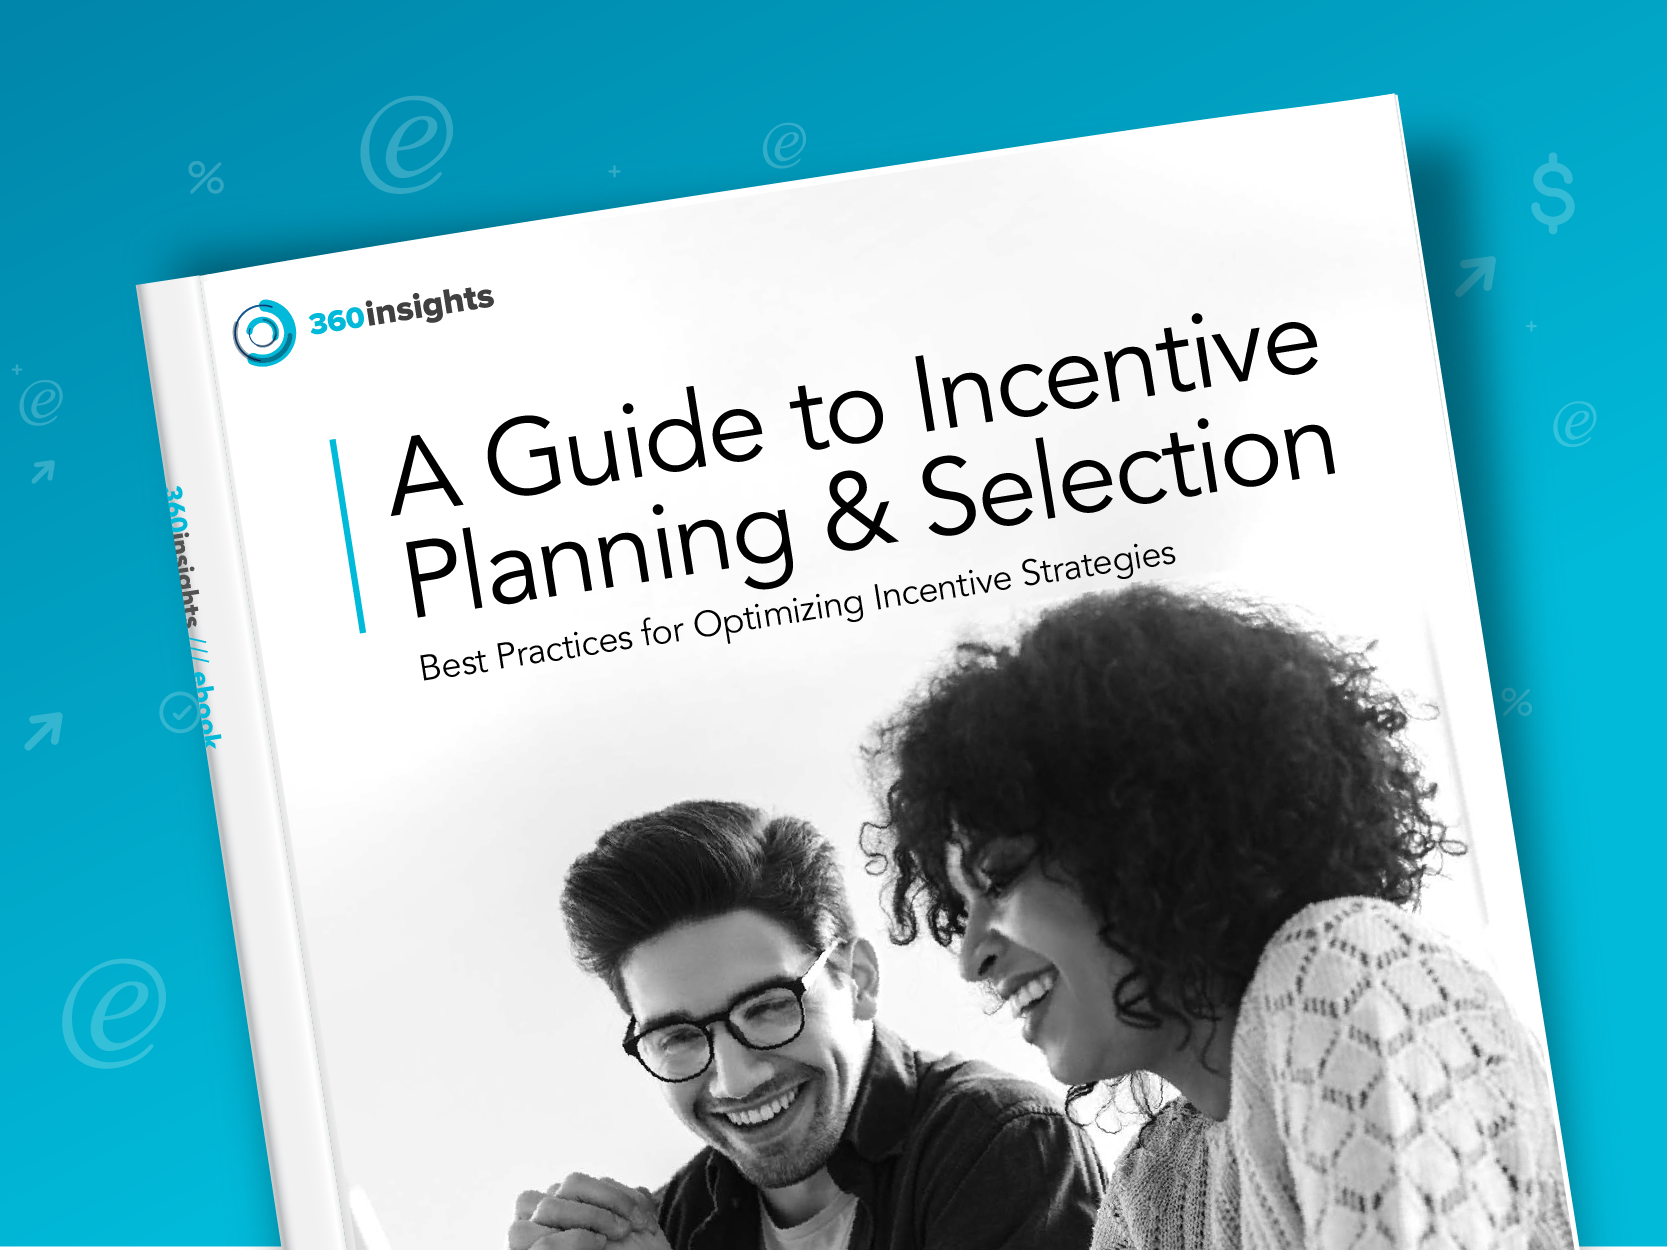 eBook about a guide to incentive planning & selection